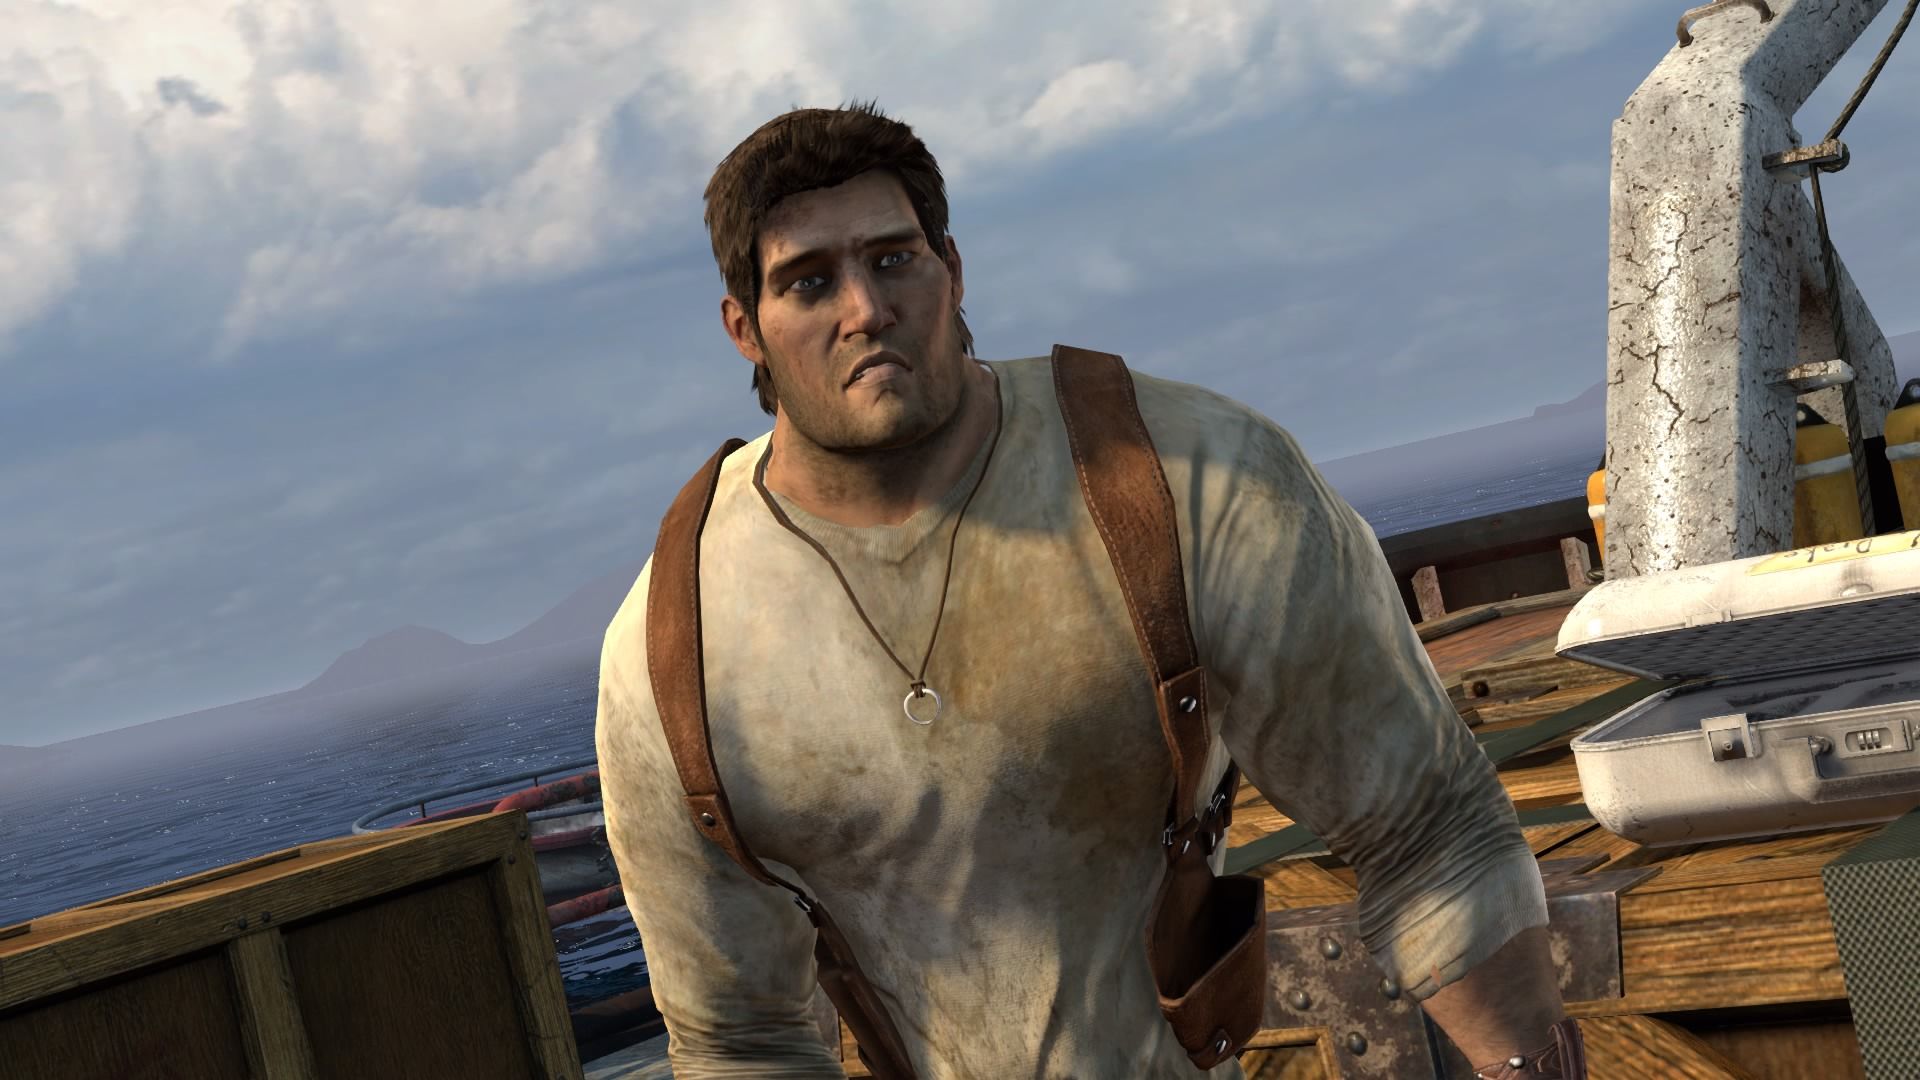 where to buy uncharted 1 pc